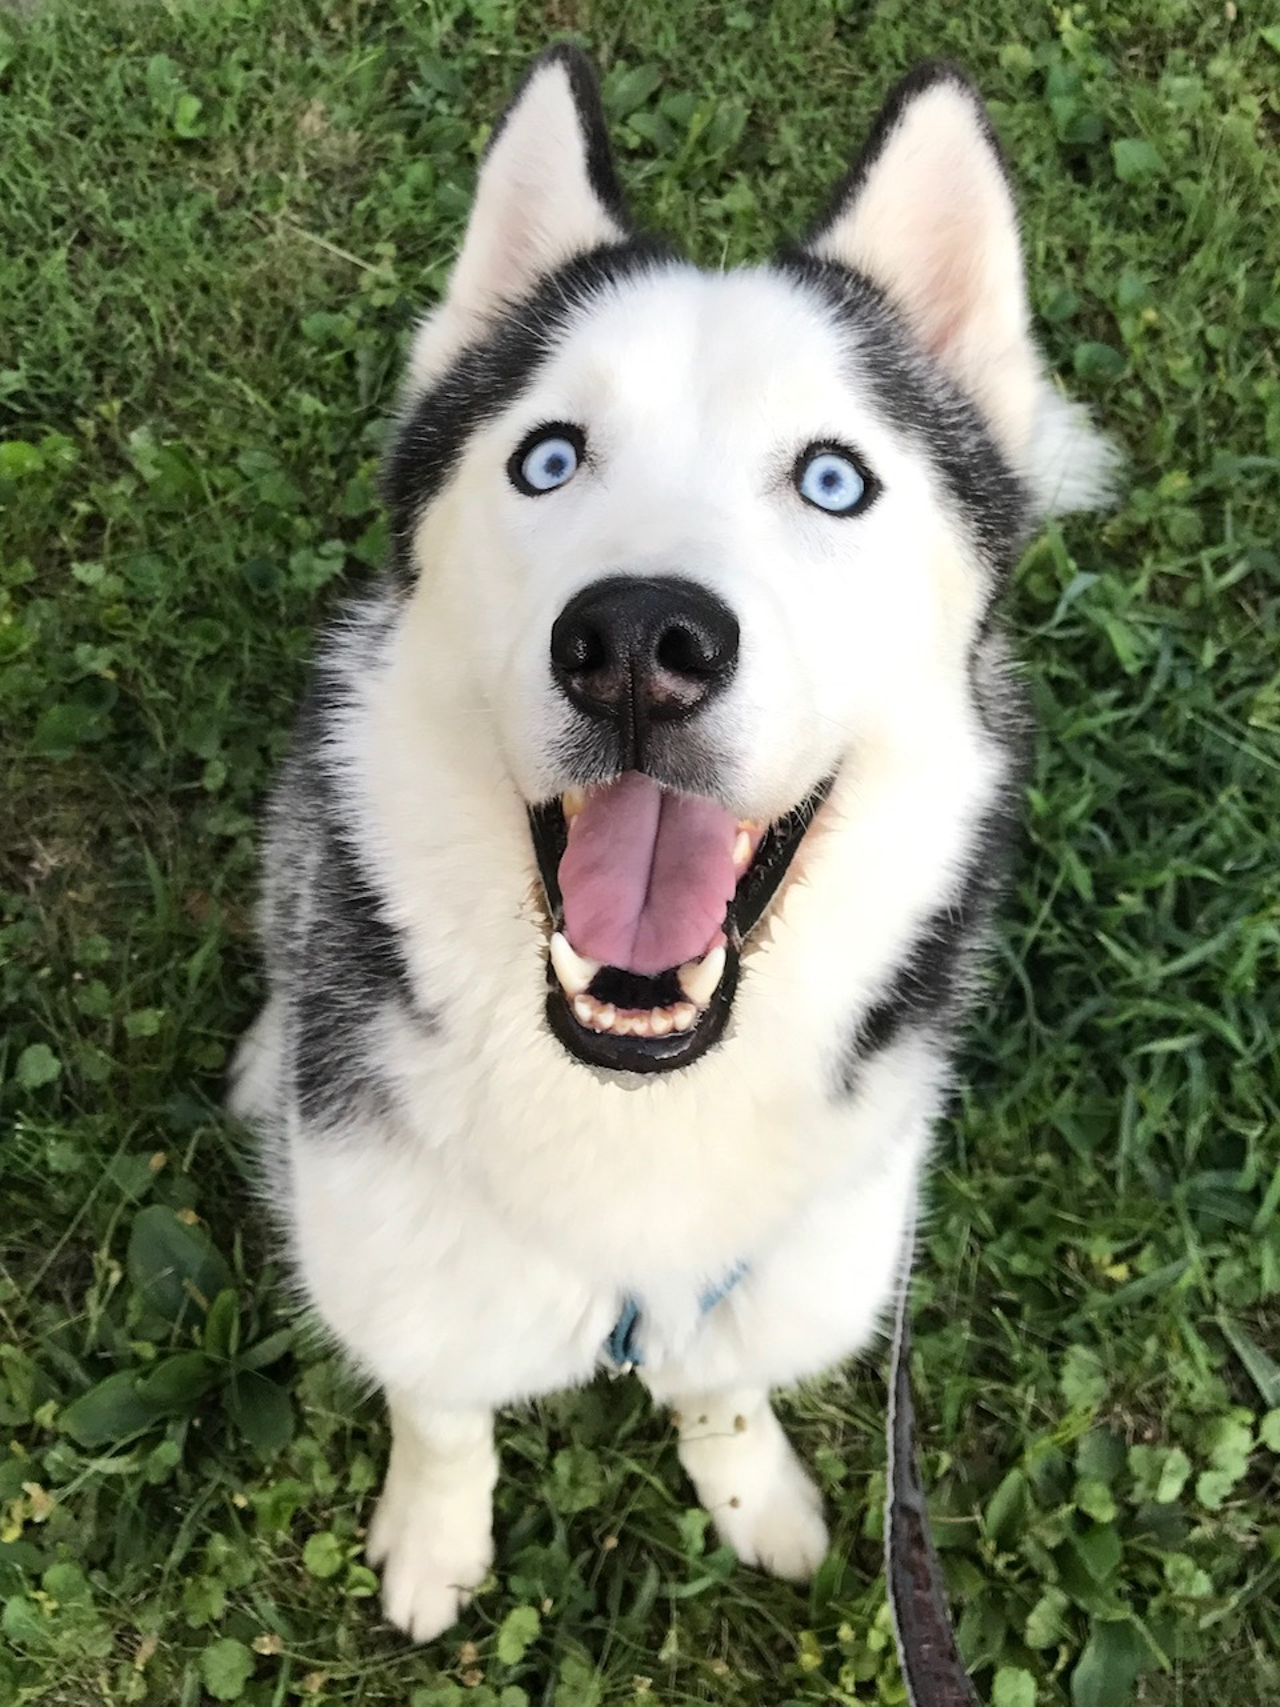 Name: Avi | Breed: Siberian Husky | Age: 2 years old | Sex: Male | Rescue: Louie's Legacy